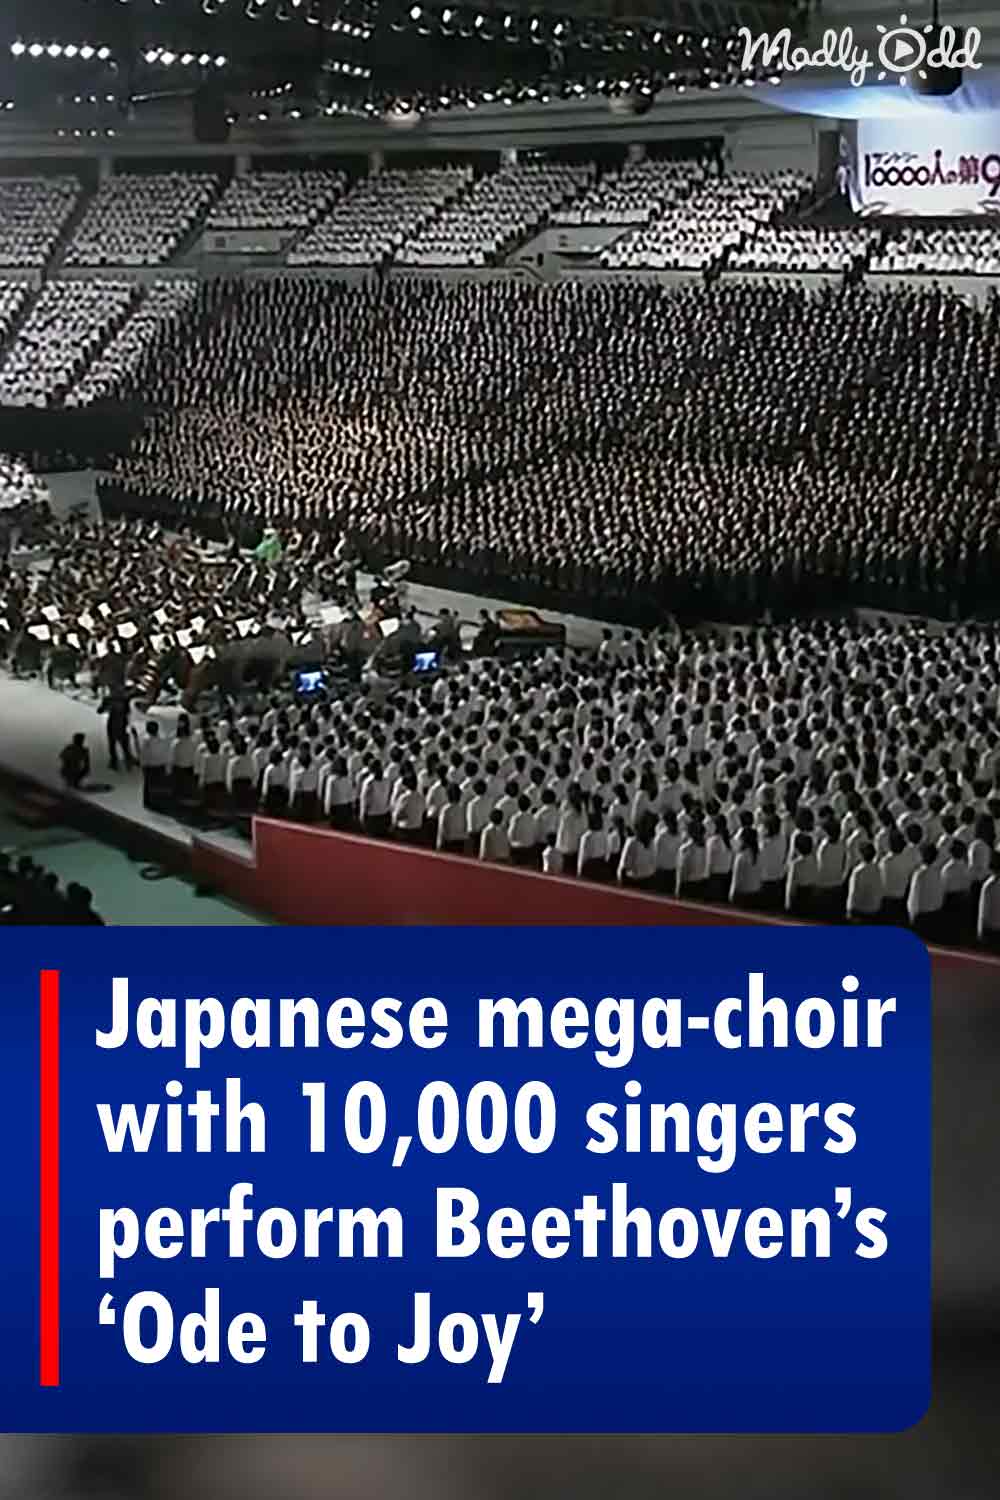 Japanese mega-choir with 10,000 singers perform Beethoven’s ‘Ode to Joy’